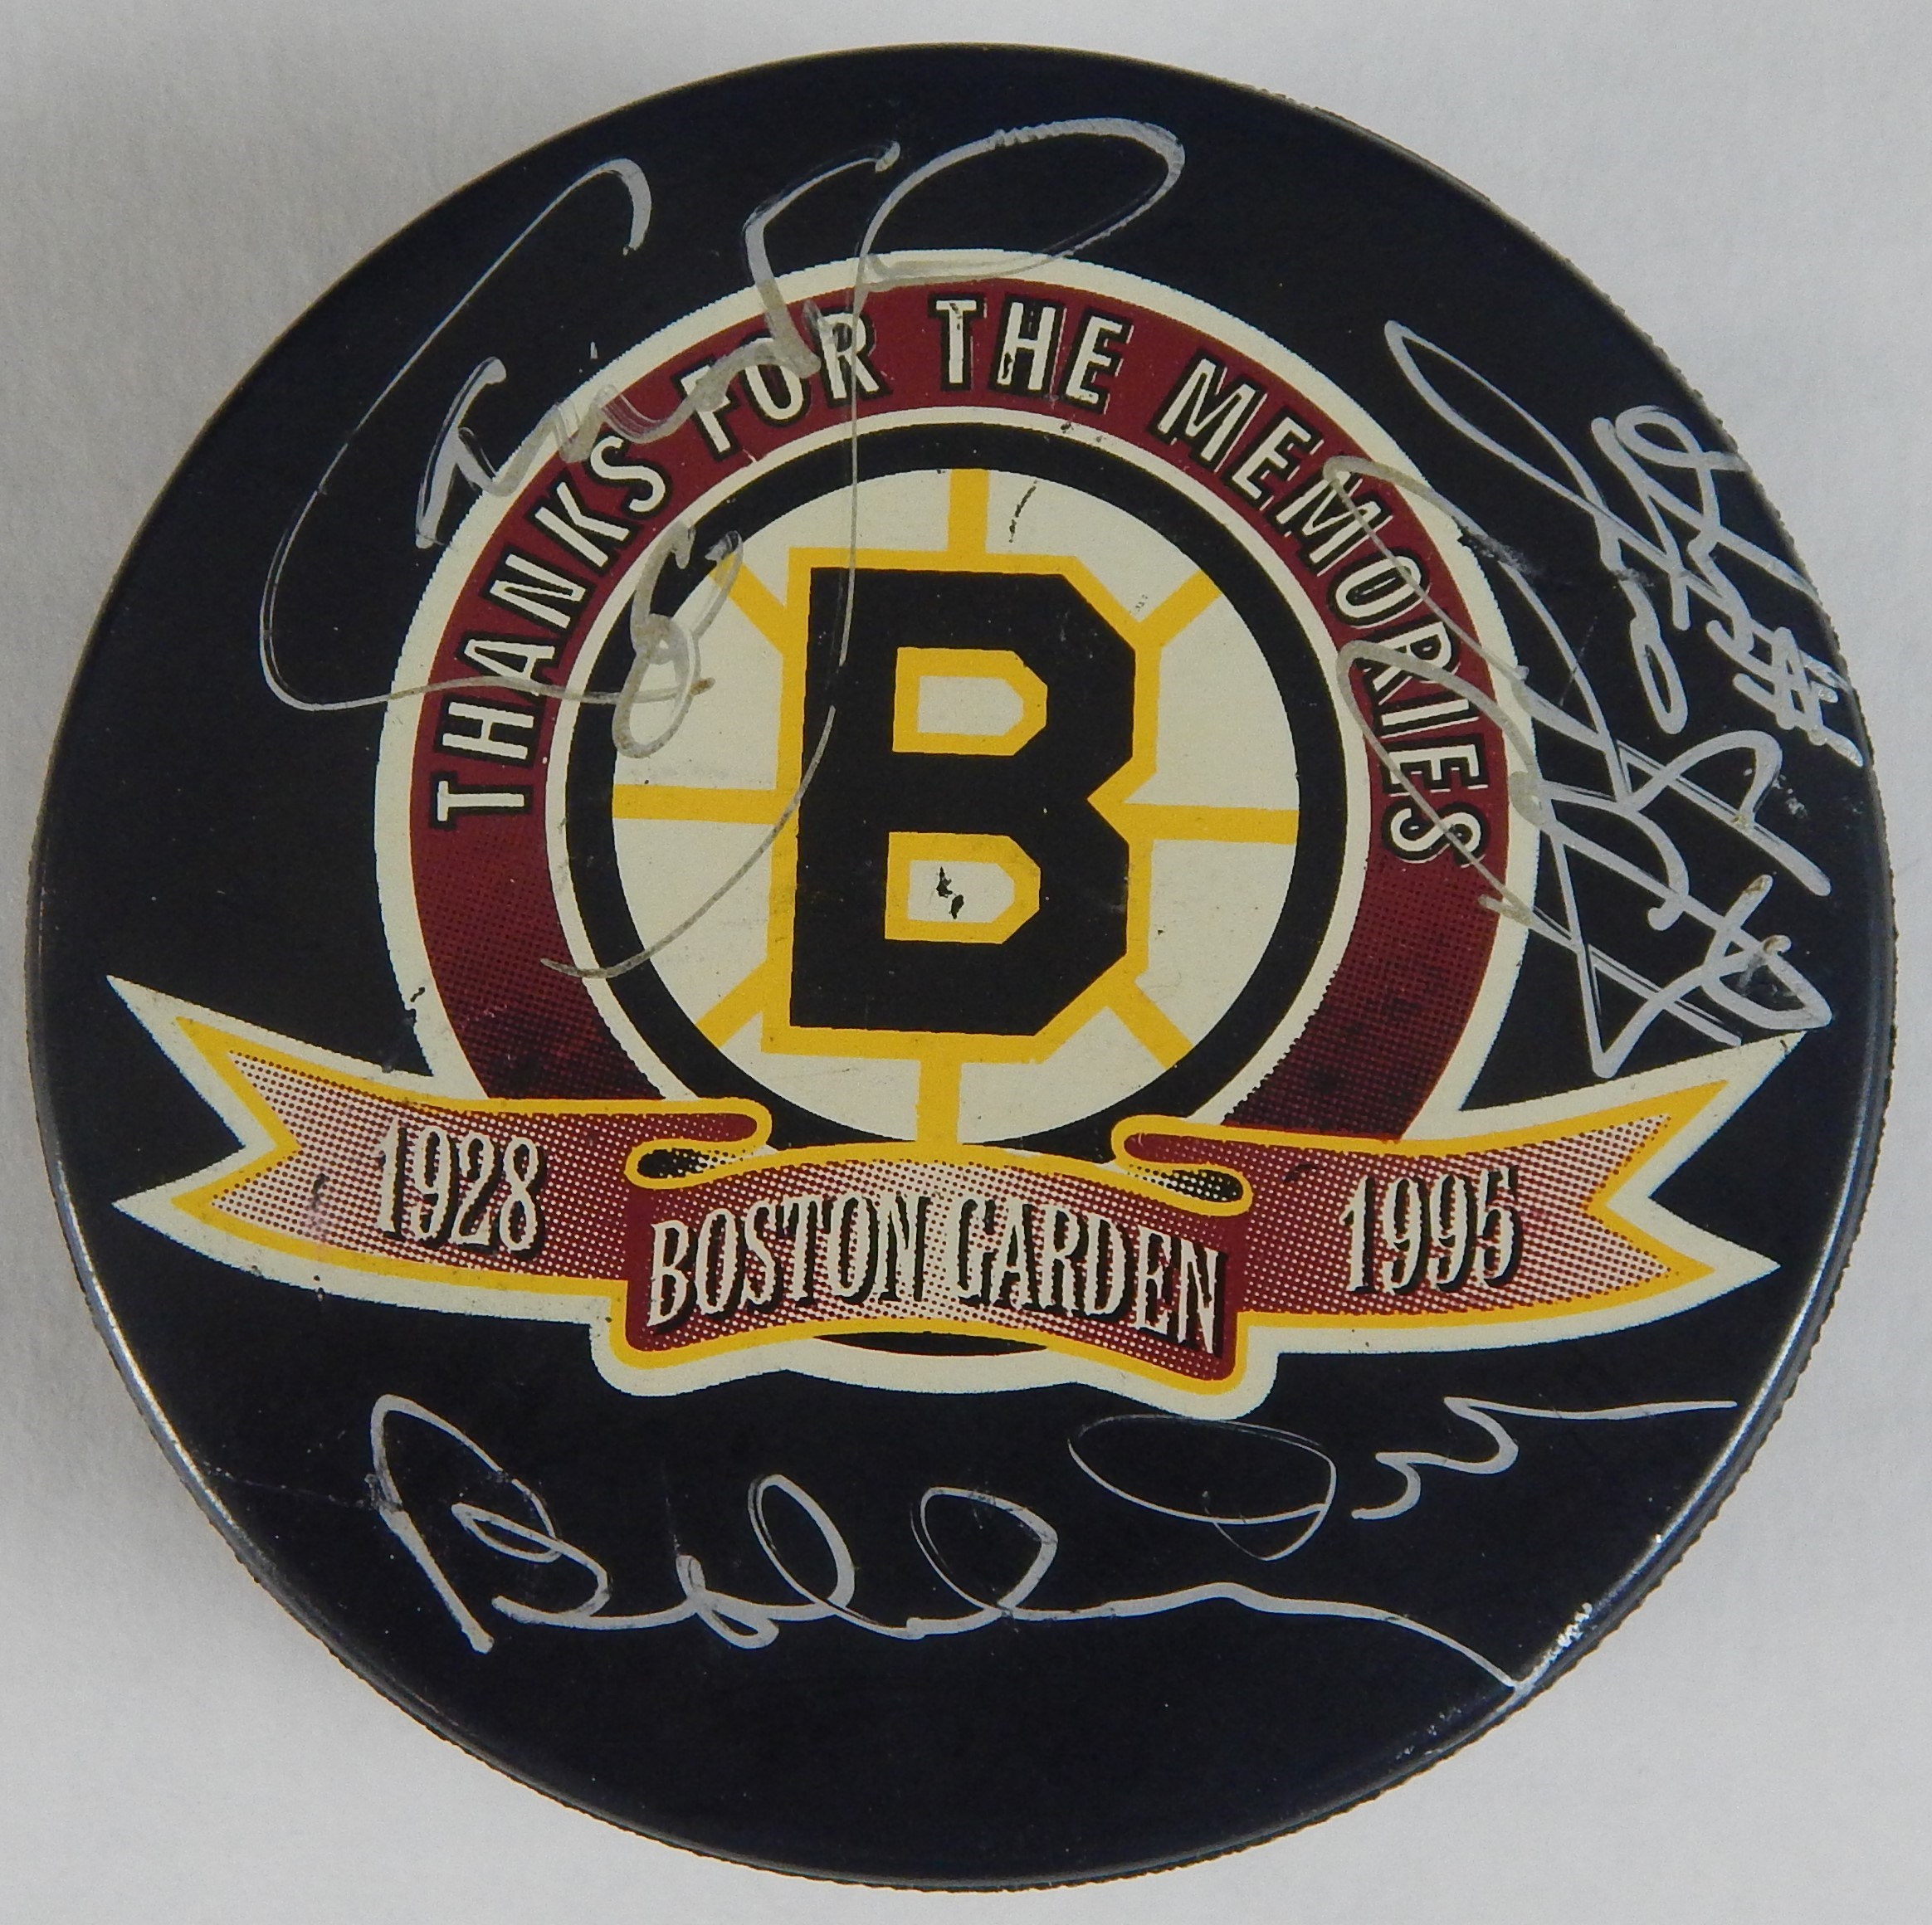 Three Boston Bruins Legends Signed Puck (Orr, Bourque, Neely)